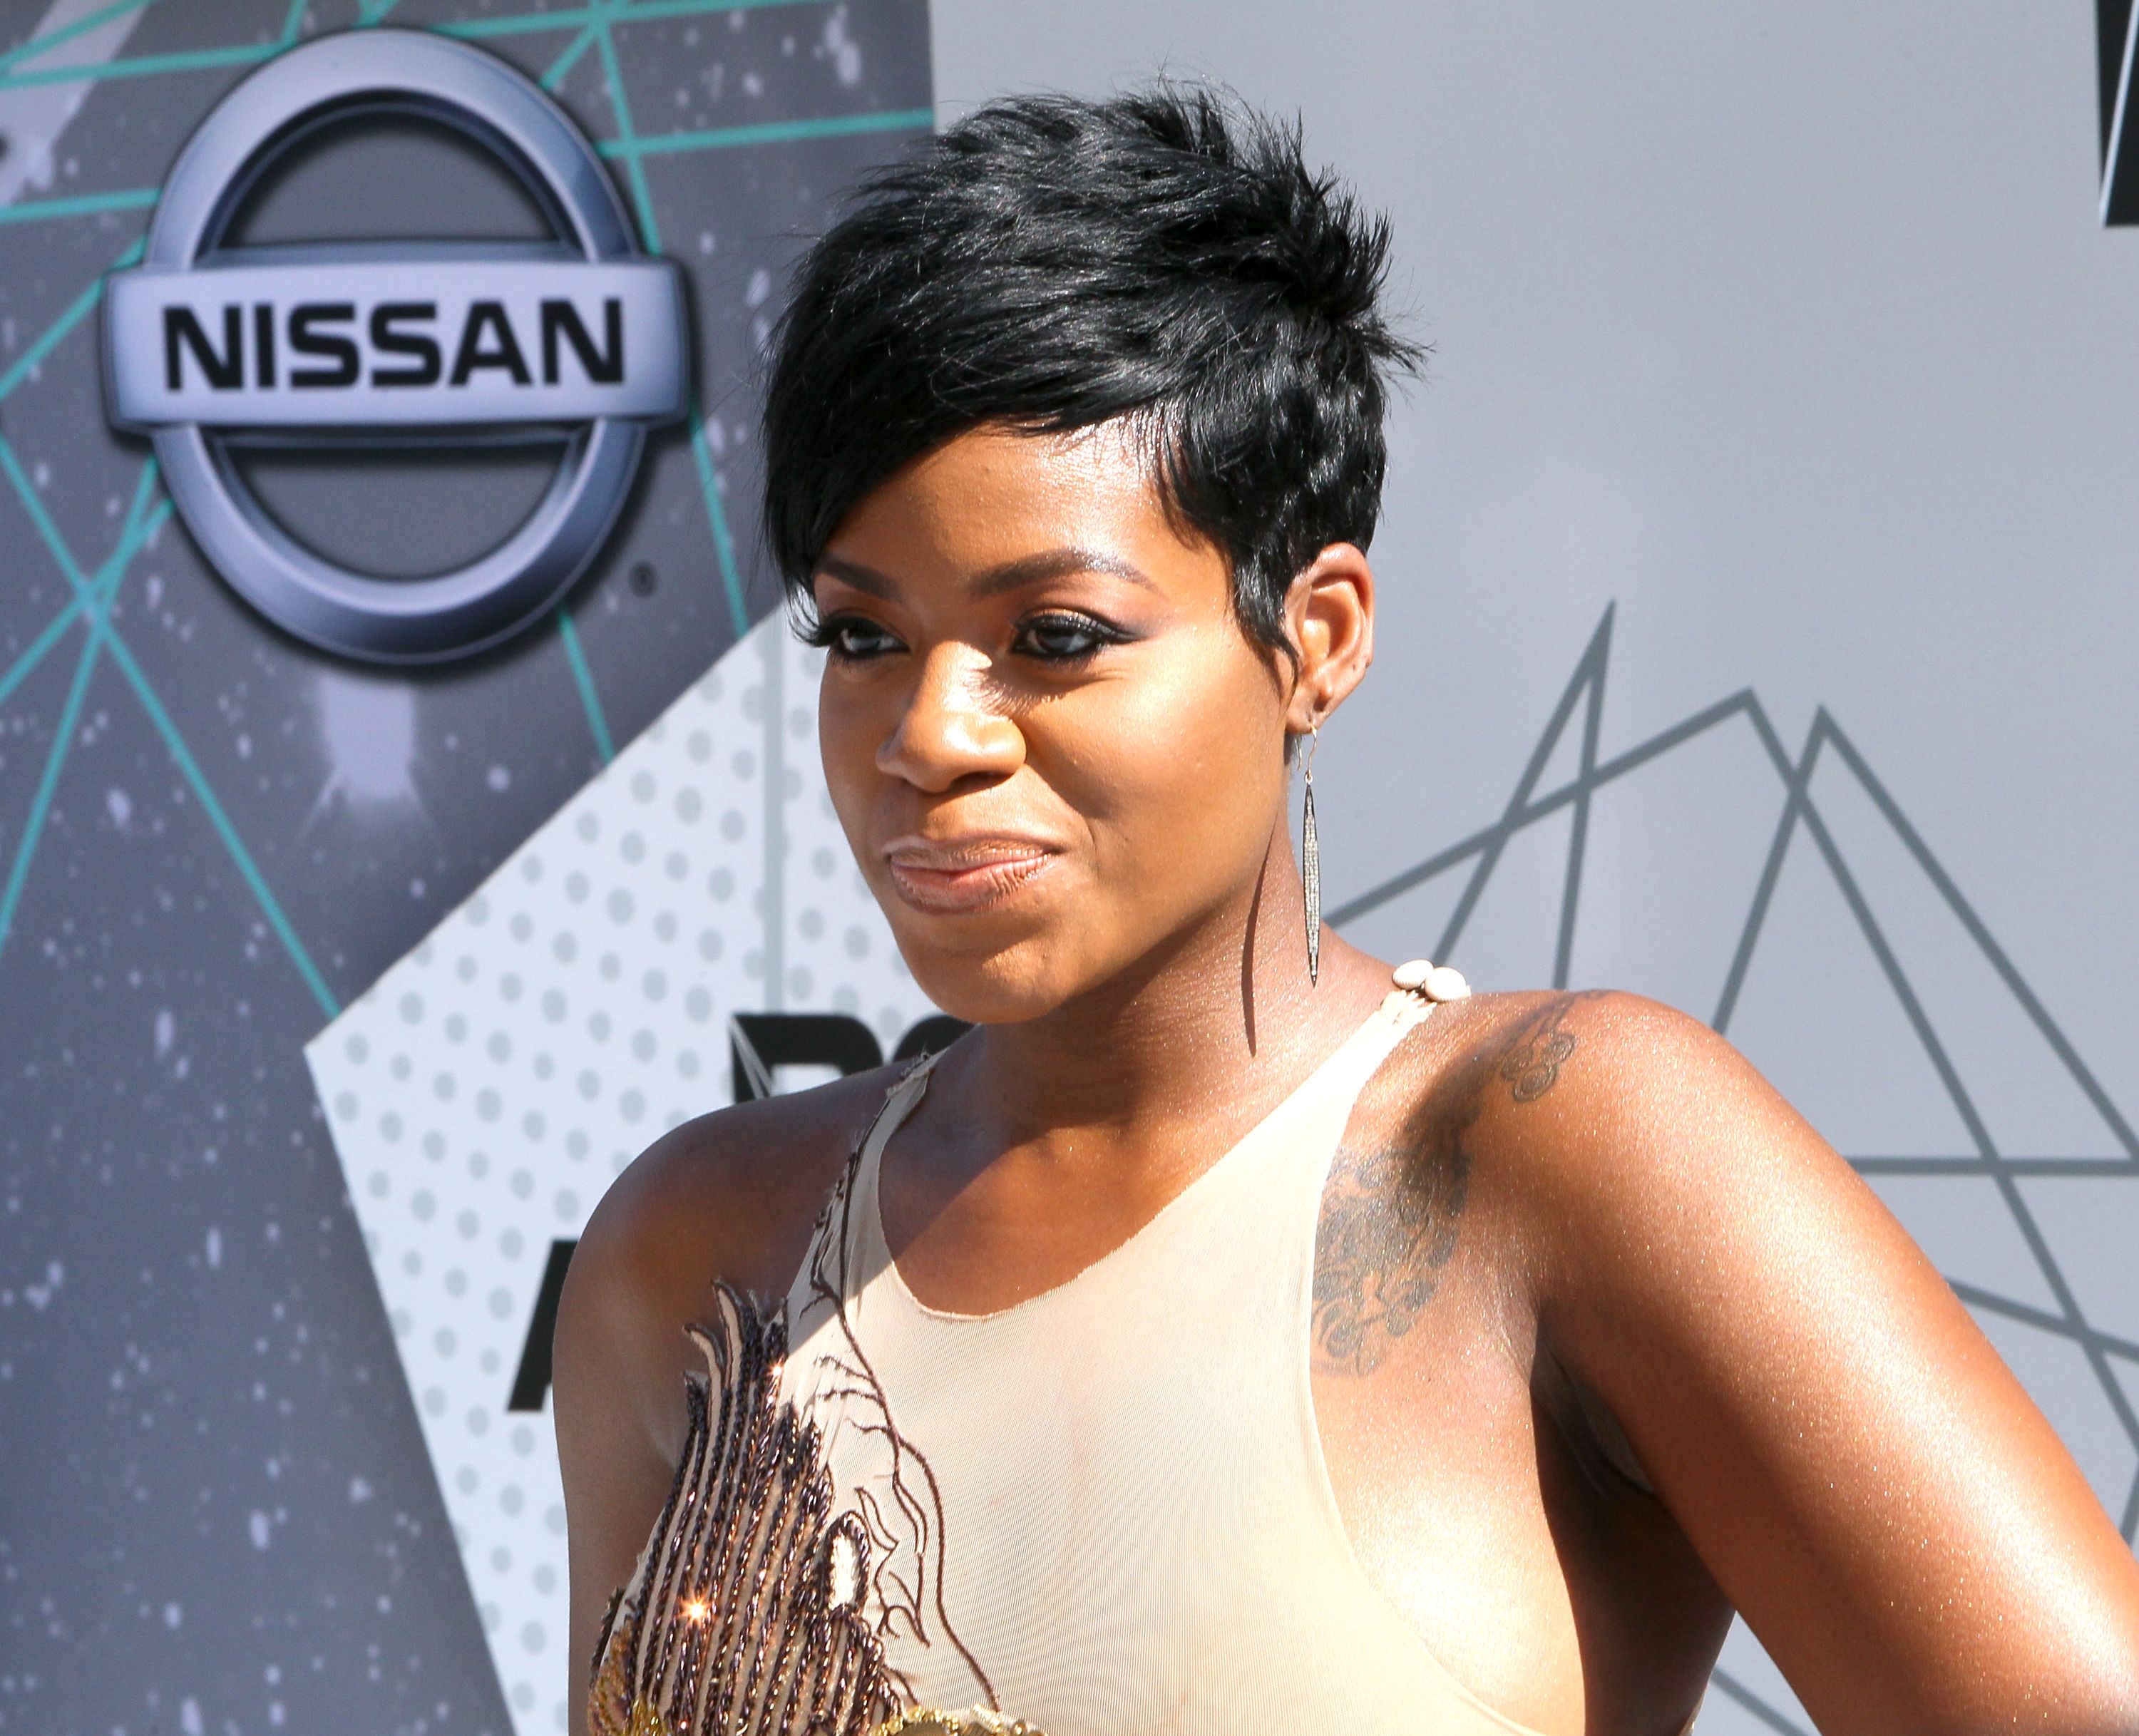 Singer Fantasia Barrino attends the 2016 BET Awards at Microsoft Theater on June 26, 2016 | Source: Getty Images